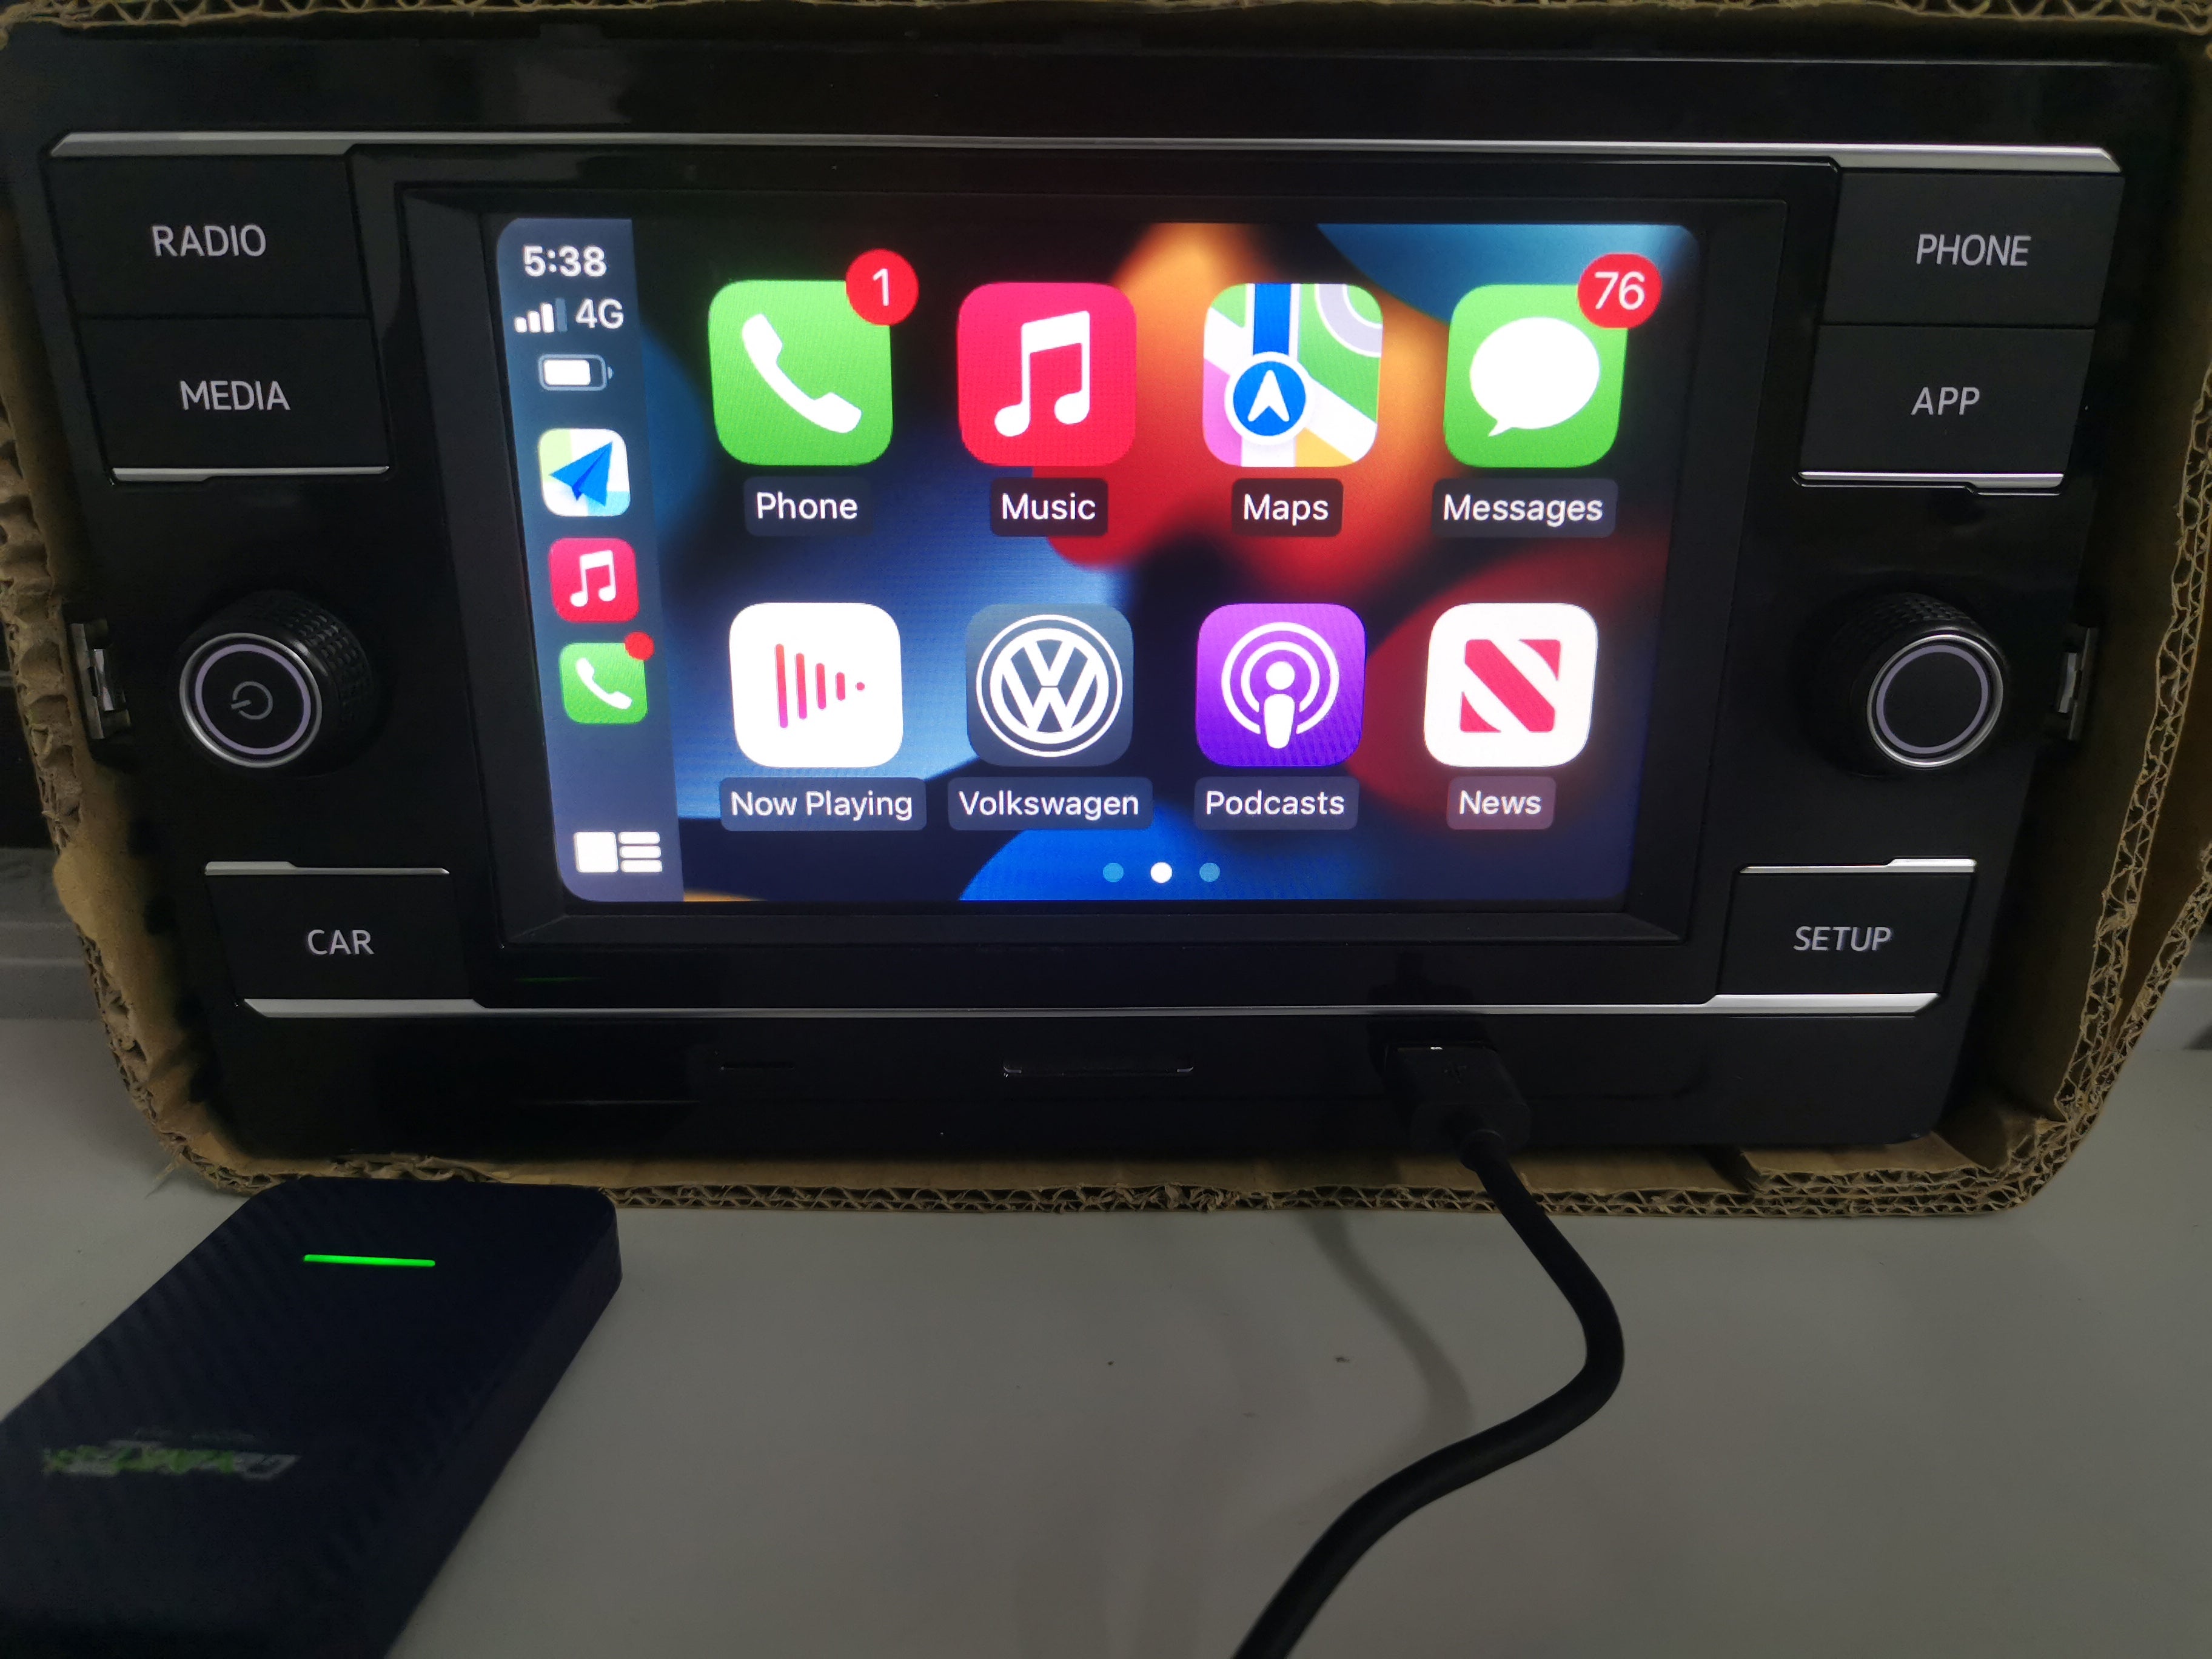 Carlinkit 4.0 is the Wireless CarPlay & Android Auto Dongle You've